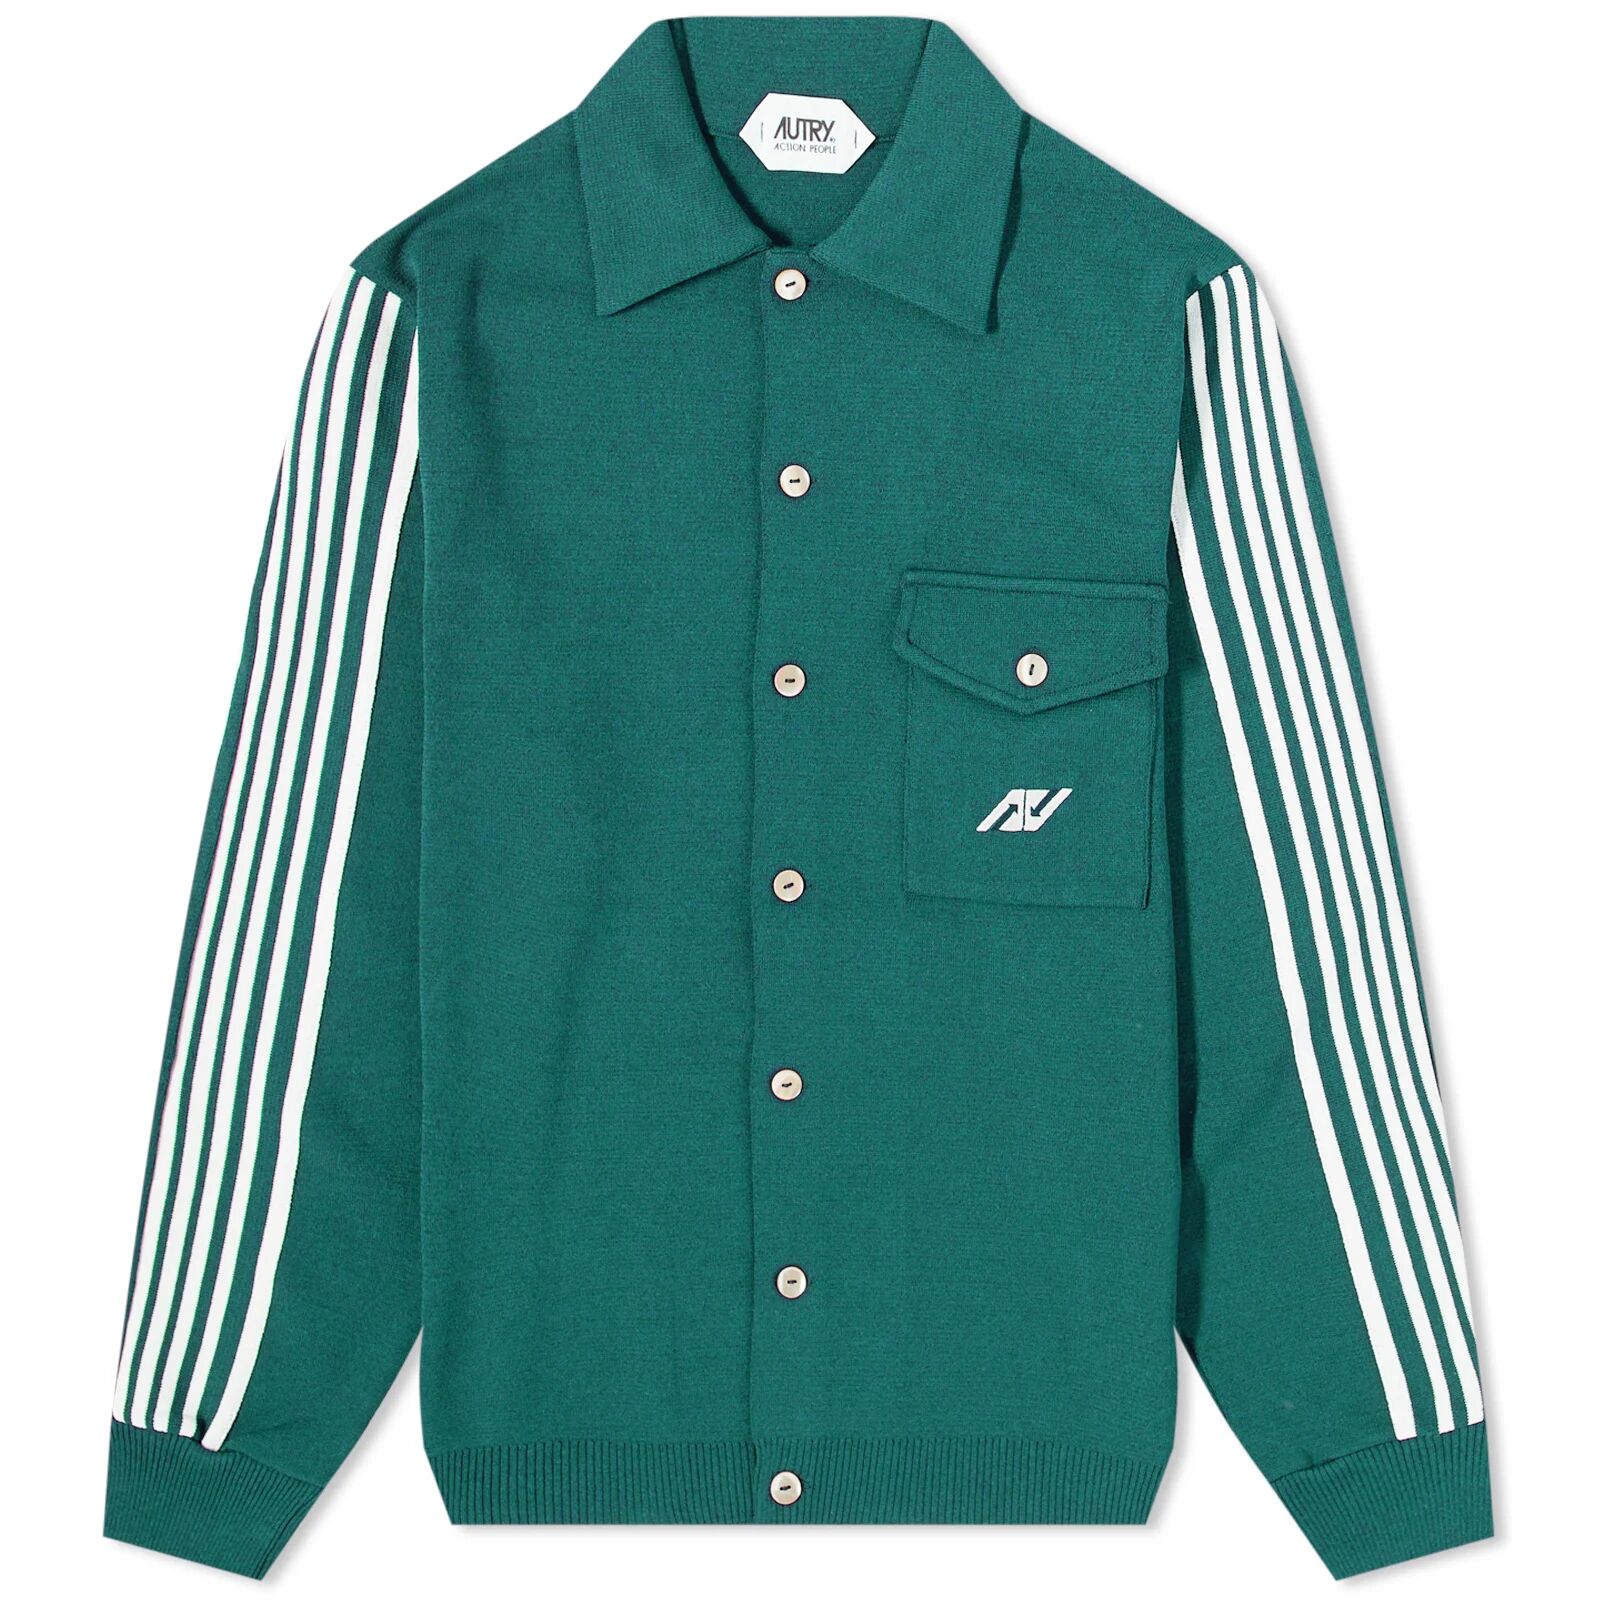 Autry Men's Knitted Sporty Track Jacket in Green, Size Large